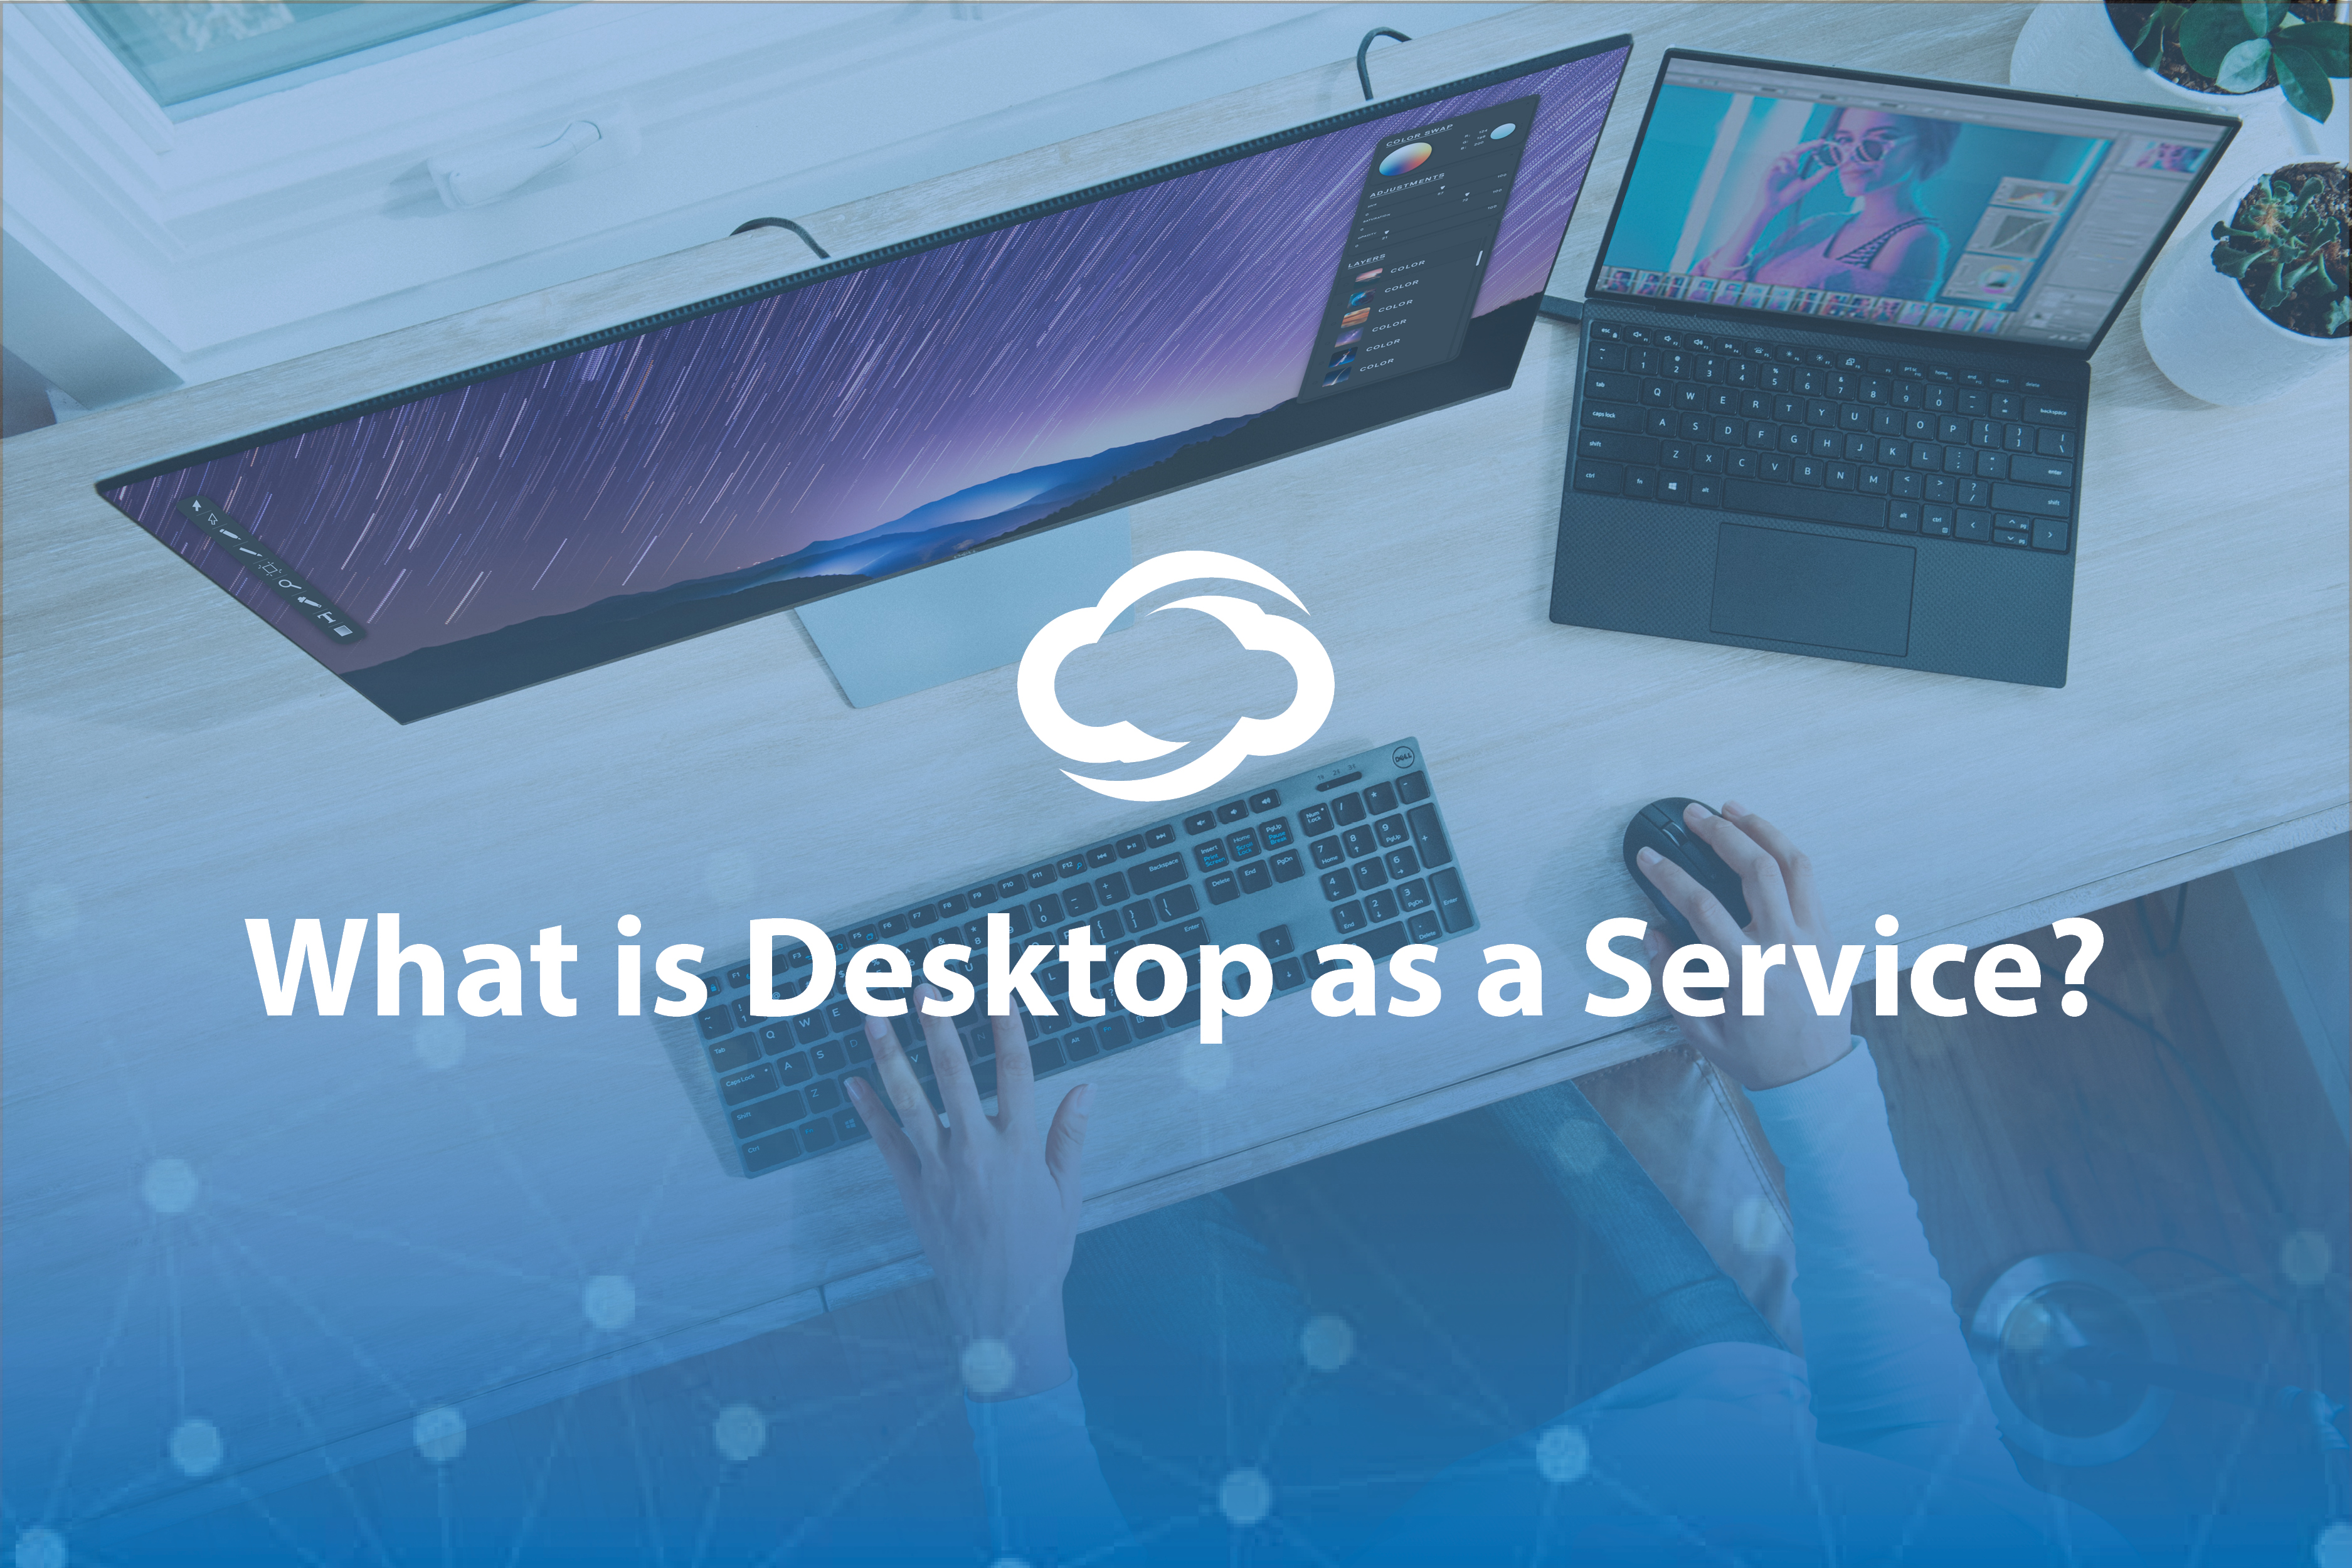 Blog Image - What is Desktop as a Service